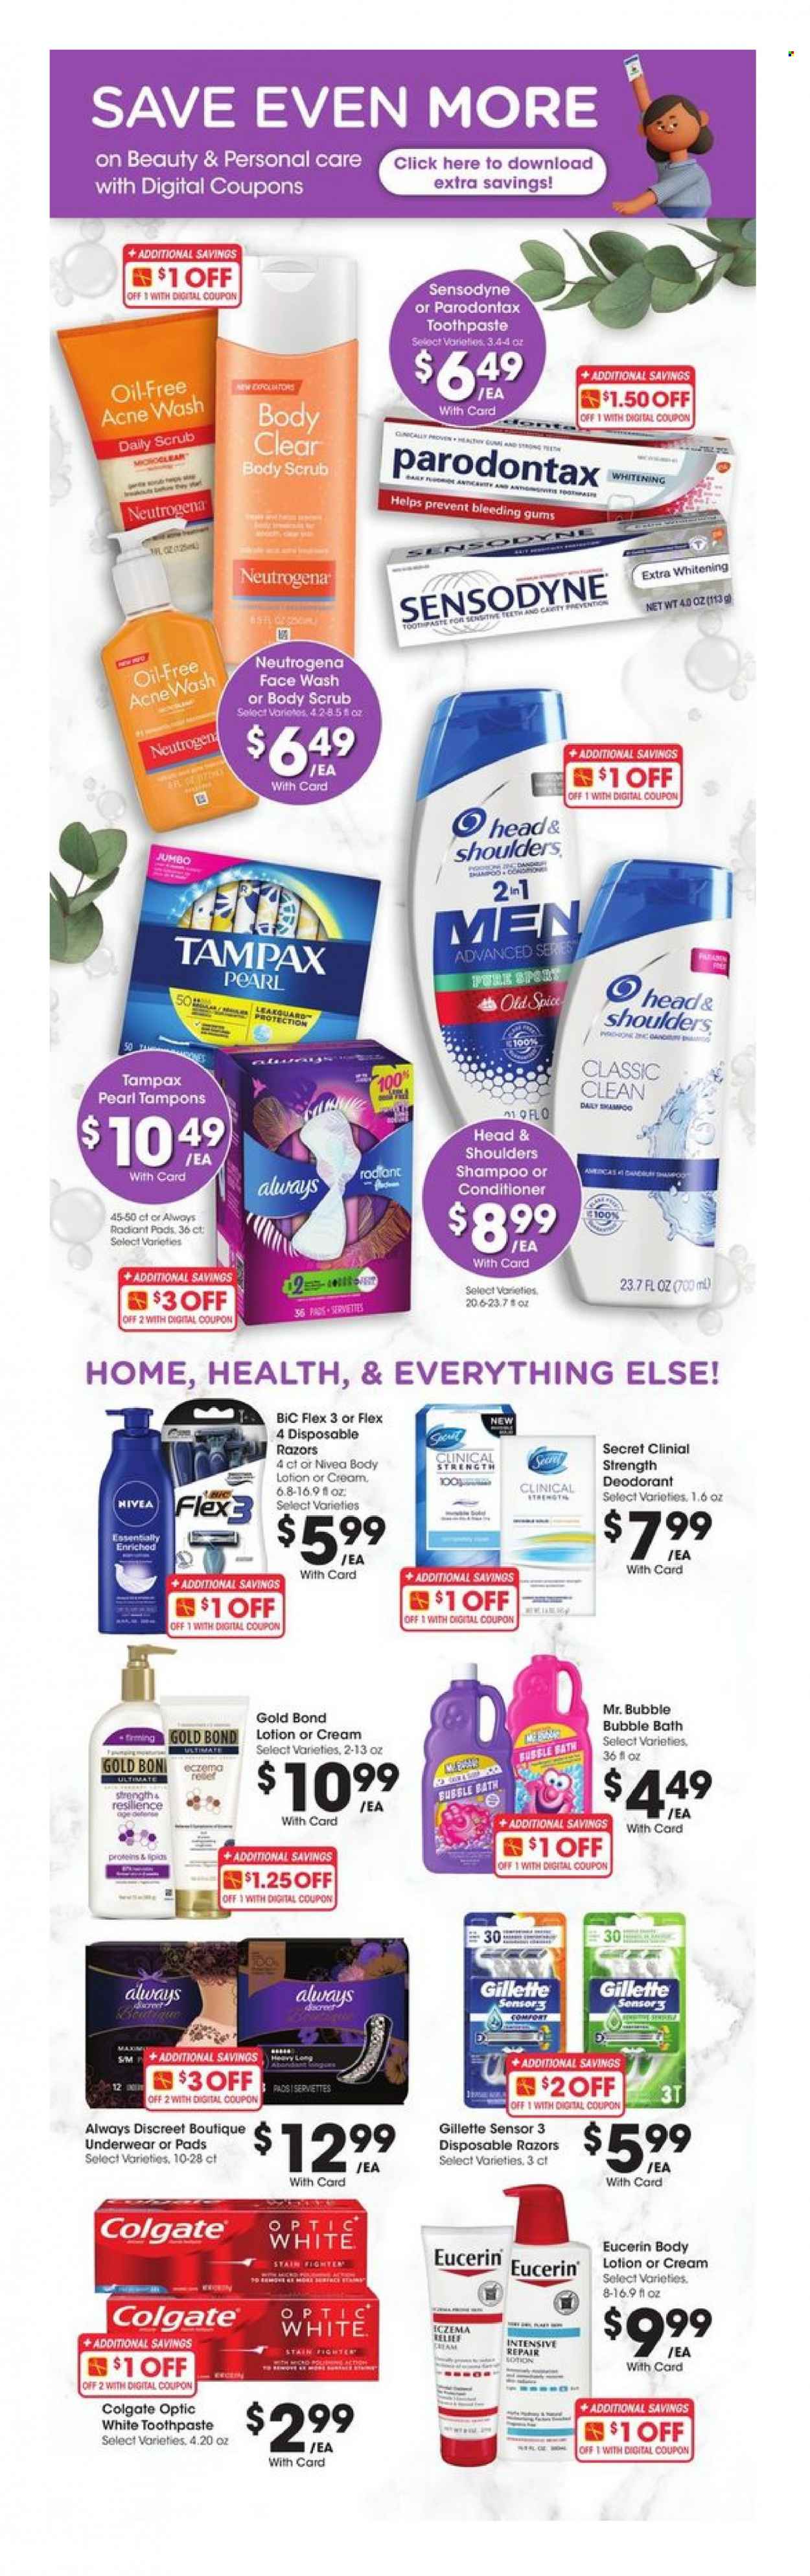 thumbnail - Dillons Flyer - 01/05/2022 - 02/01/2022 - Sales products - spice, Nivea, bubble bath, shampoo, Old Spice, face gel, Colgate, toothpaste, Sensodyne, Tampax, Always Discreet, tampons, Neutrogena, face wash, conditioner, Head & Shoulders, body lotion, body scrub, Eucerin, anti-perspirant, deodorant, BIC, Gillette, disposable razor. Page 1.